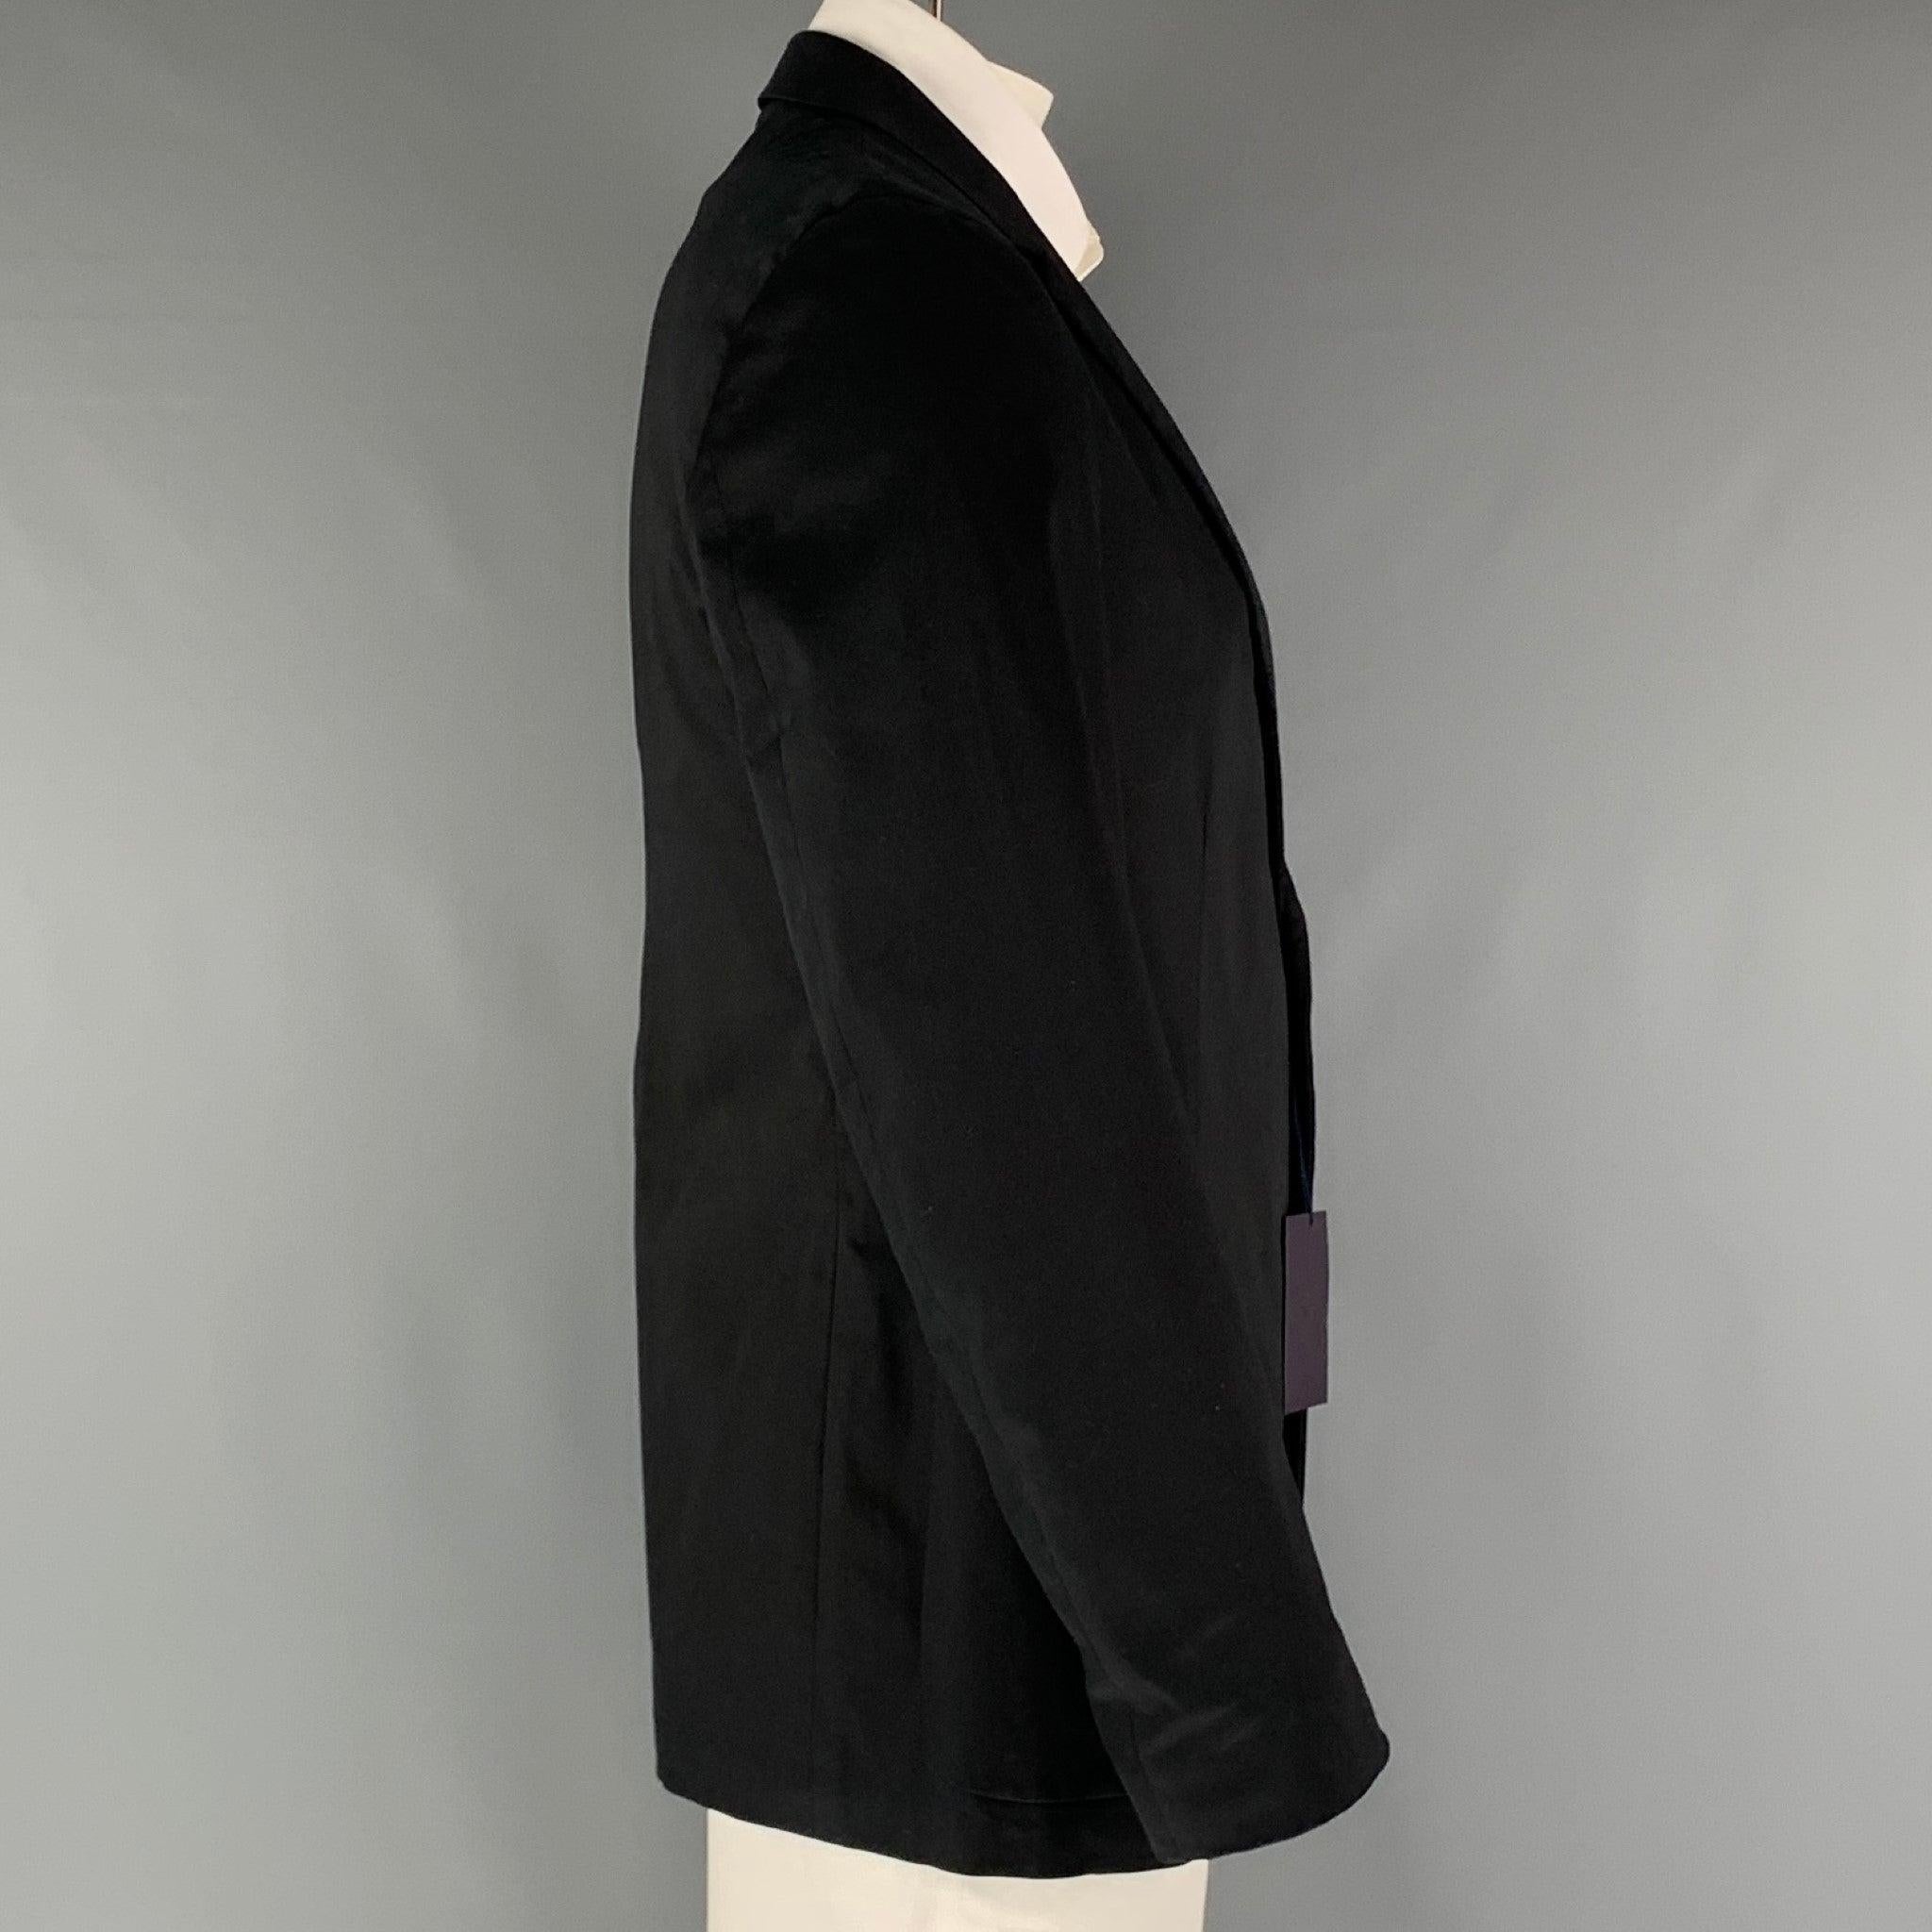 PRADA sport coat comes in a black cotton and elastane woven material with a full liner featuring a notch lapel, patch pockets, single back vent, and a two button closure. Made in Italy.New with Tags. 

Marked:   56 

Measurements: 
 
Shoulder: 18